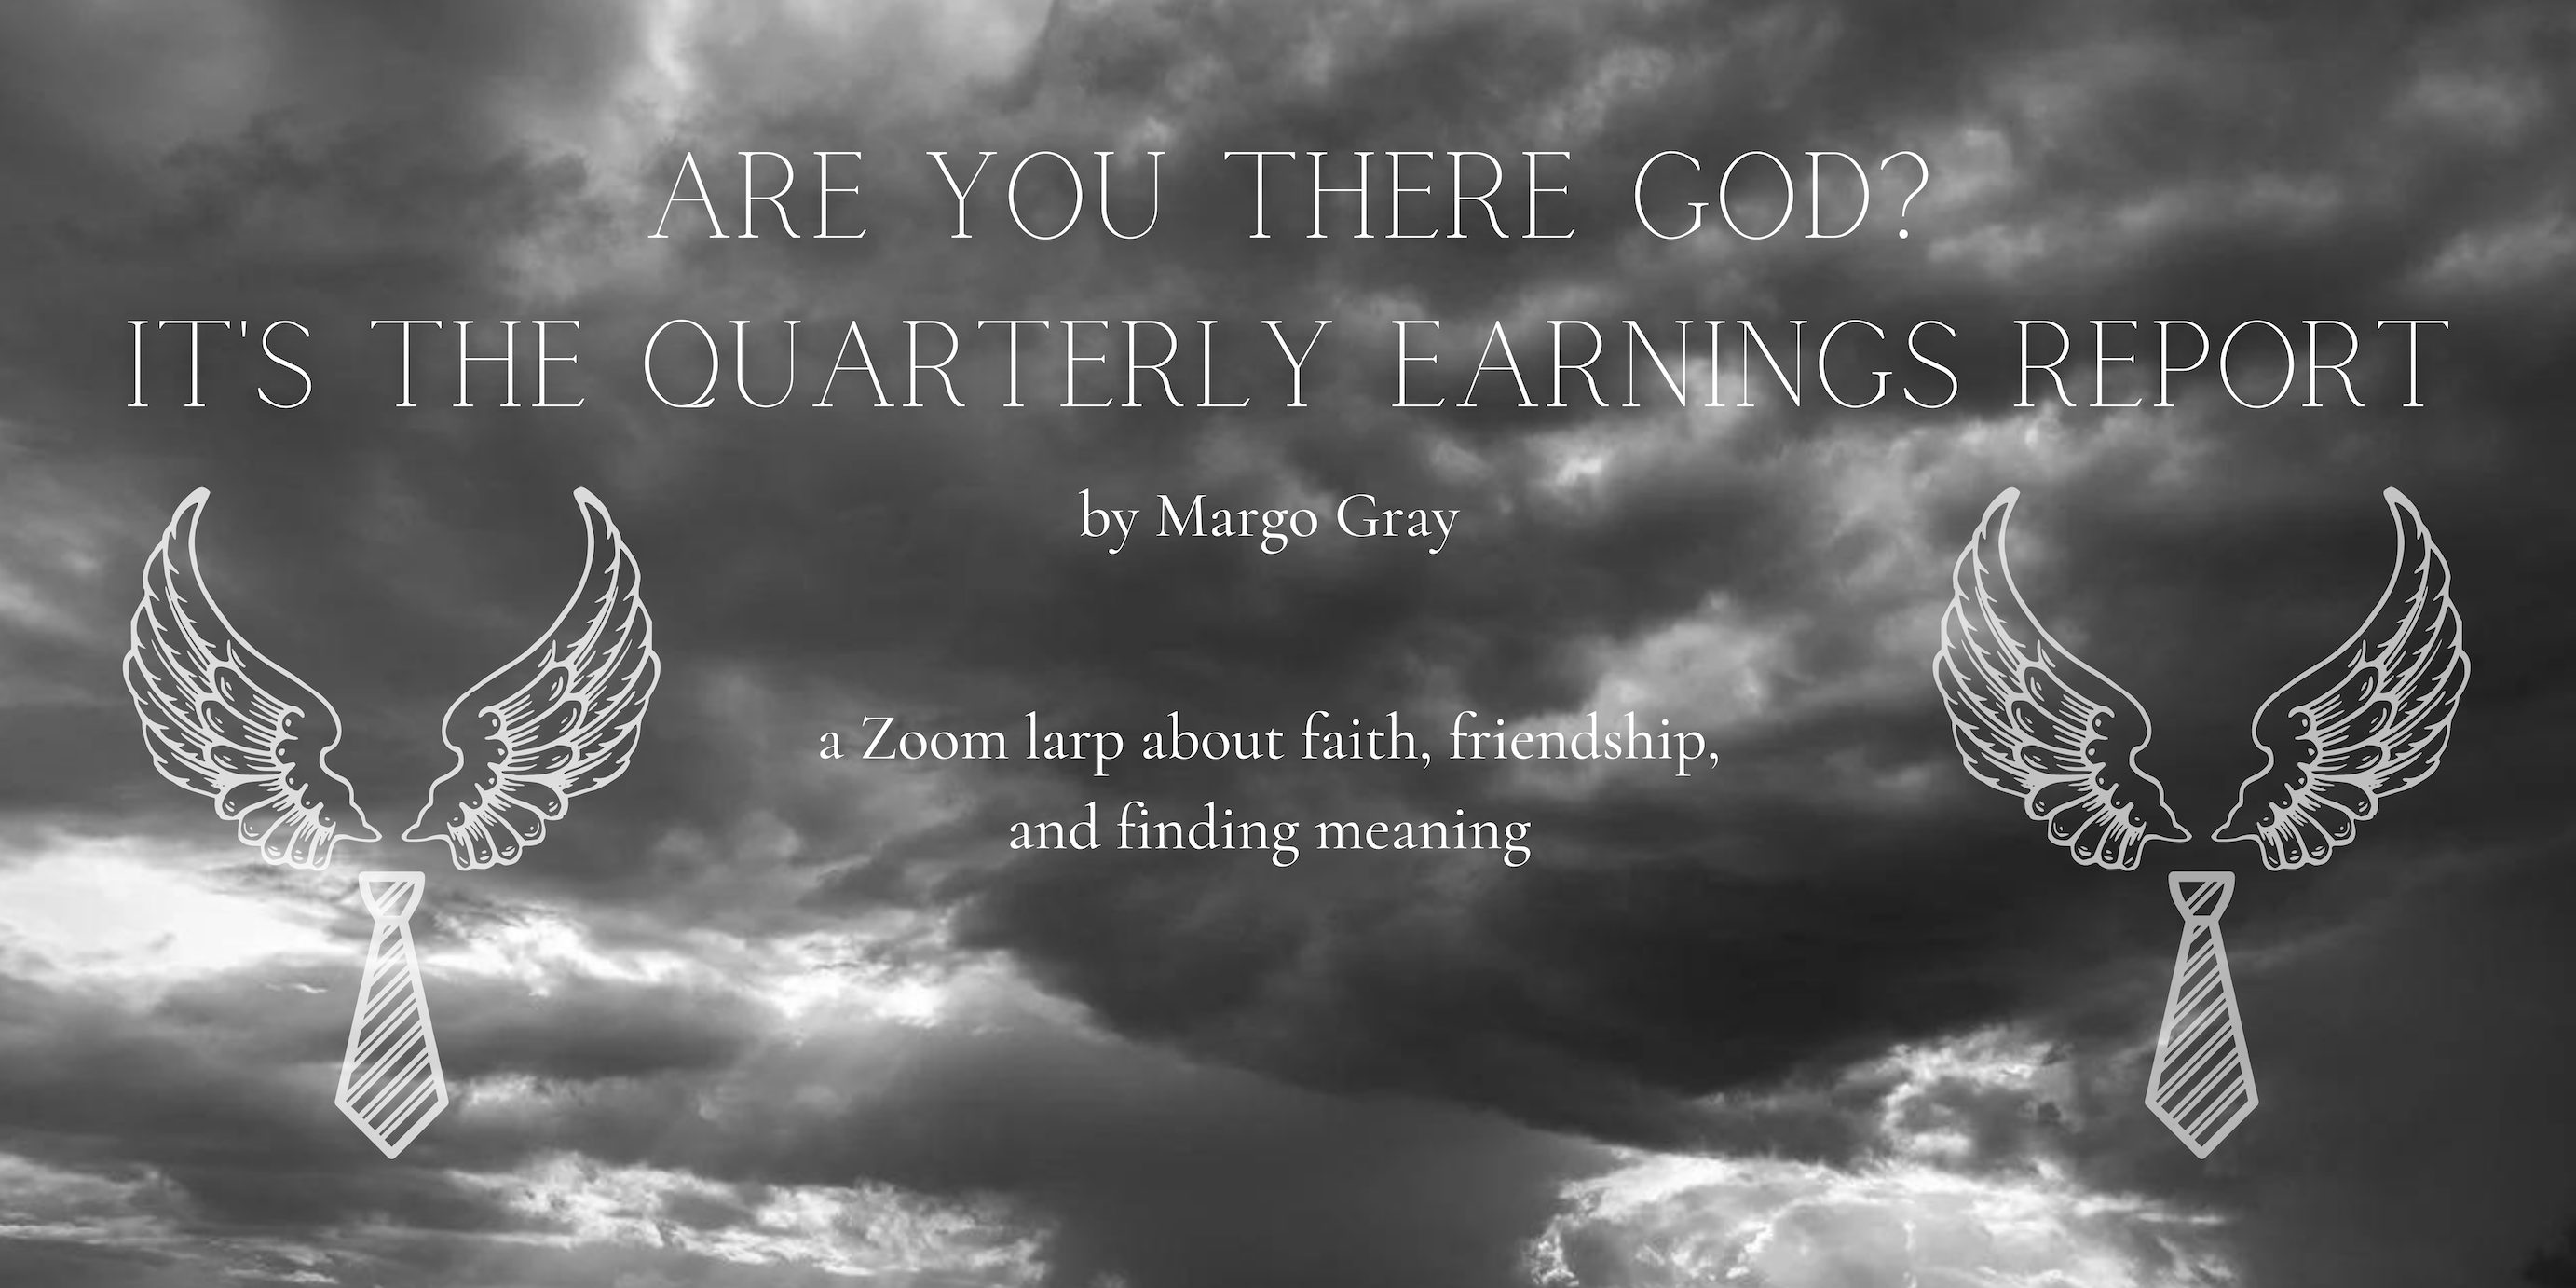 Are you there God? It's the quarterly earnings report